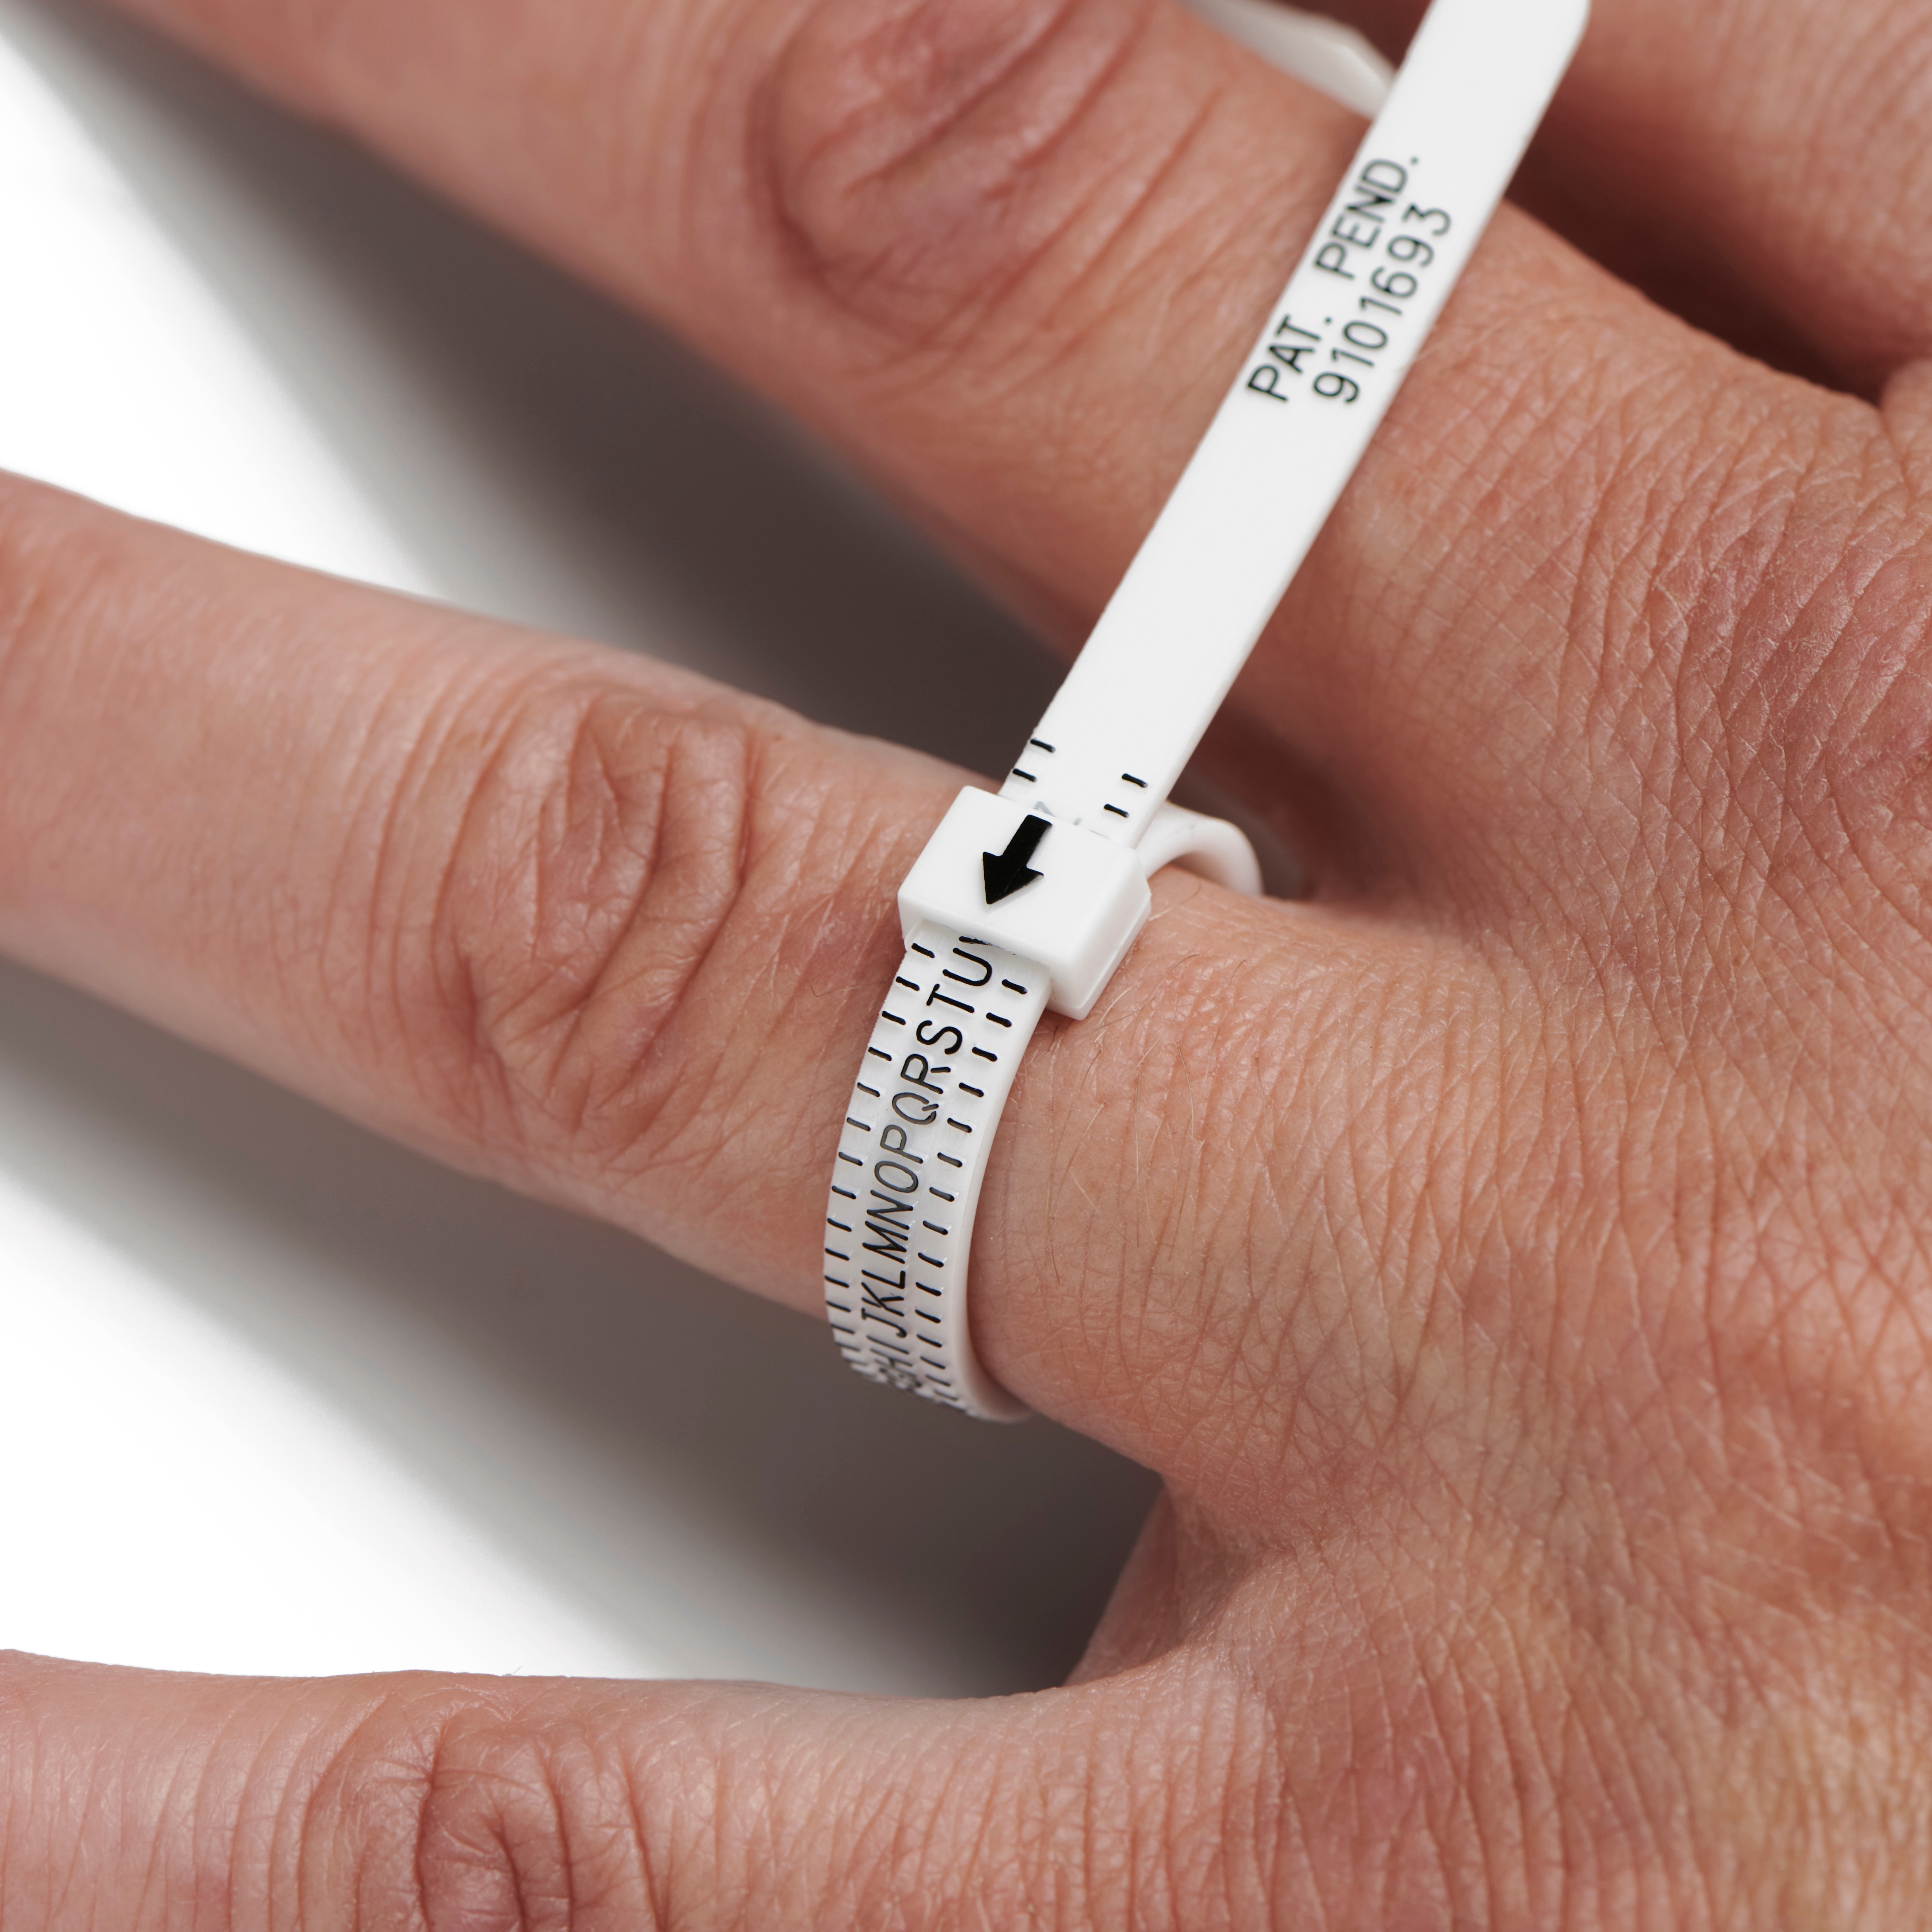 How to Find Your Perfect Ring Size, From Home!